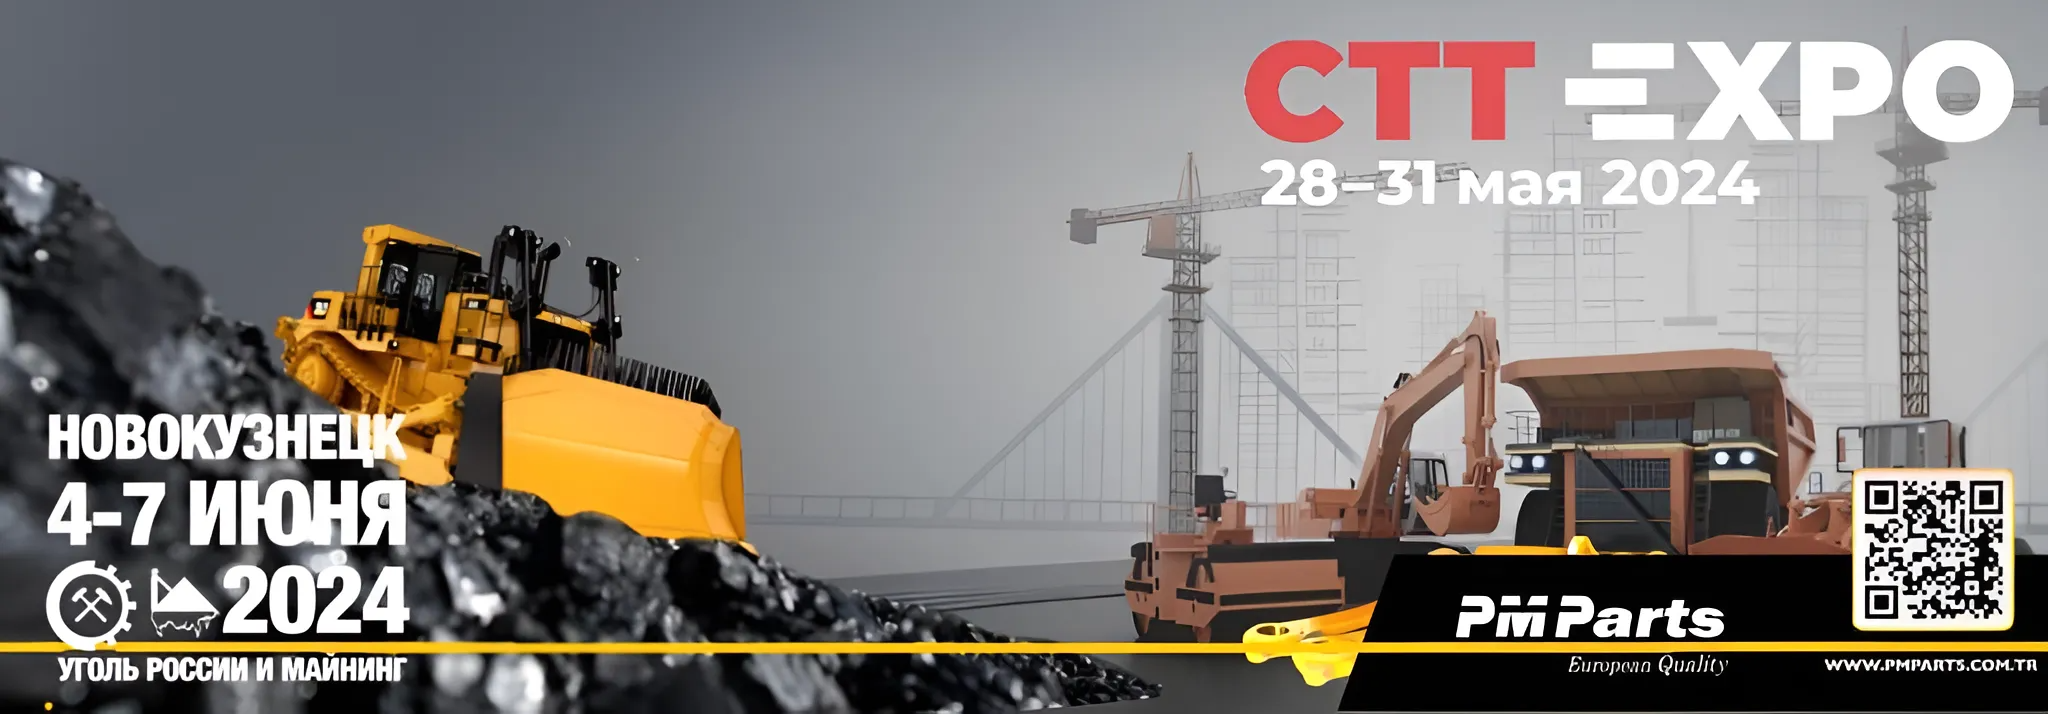 CTT EXPO PMPARTS 2024